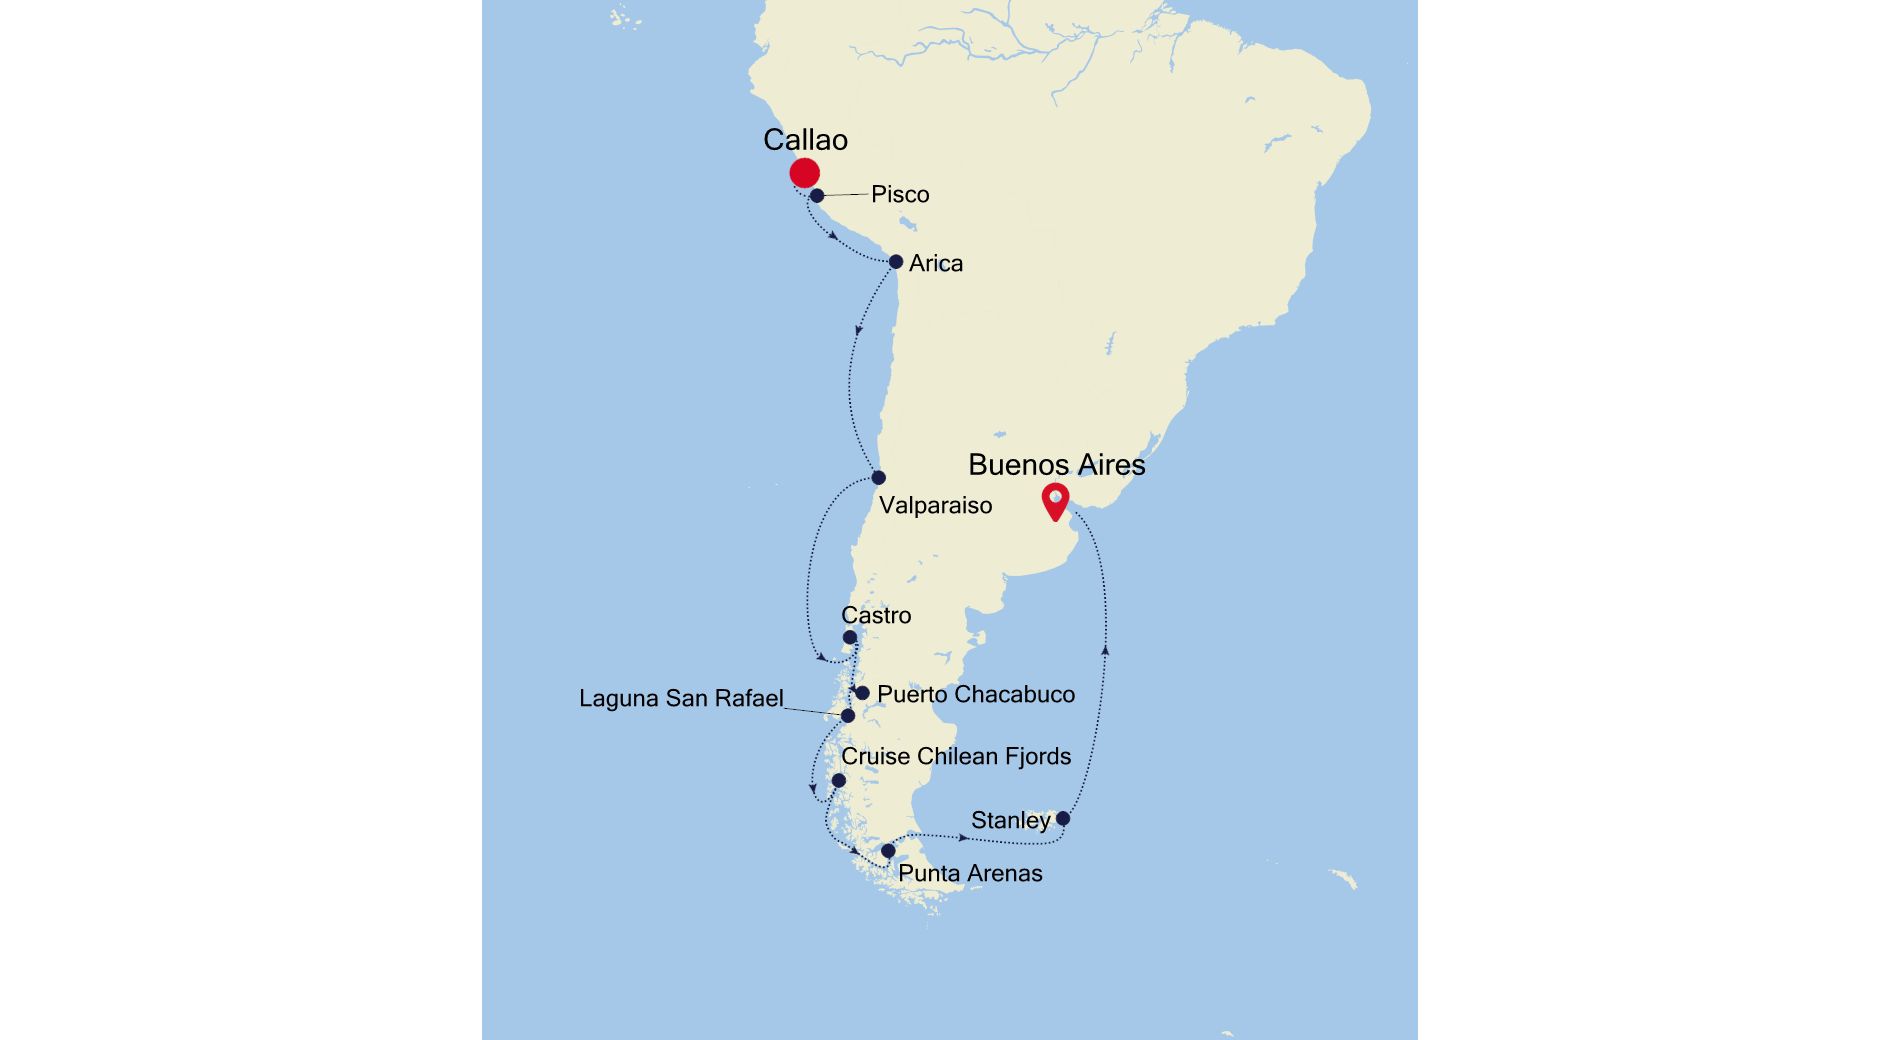 Luxury Cruise from LIMA (Callao) to BUENOS AIRES 06 Feb 2020 | Silversea1900 x 1040